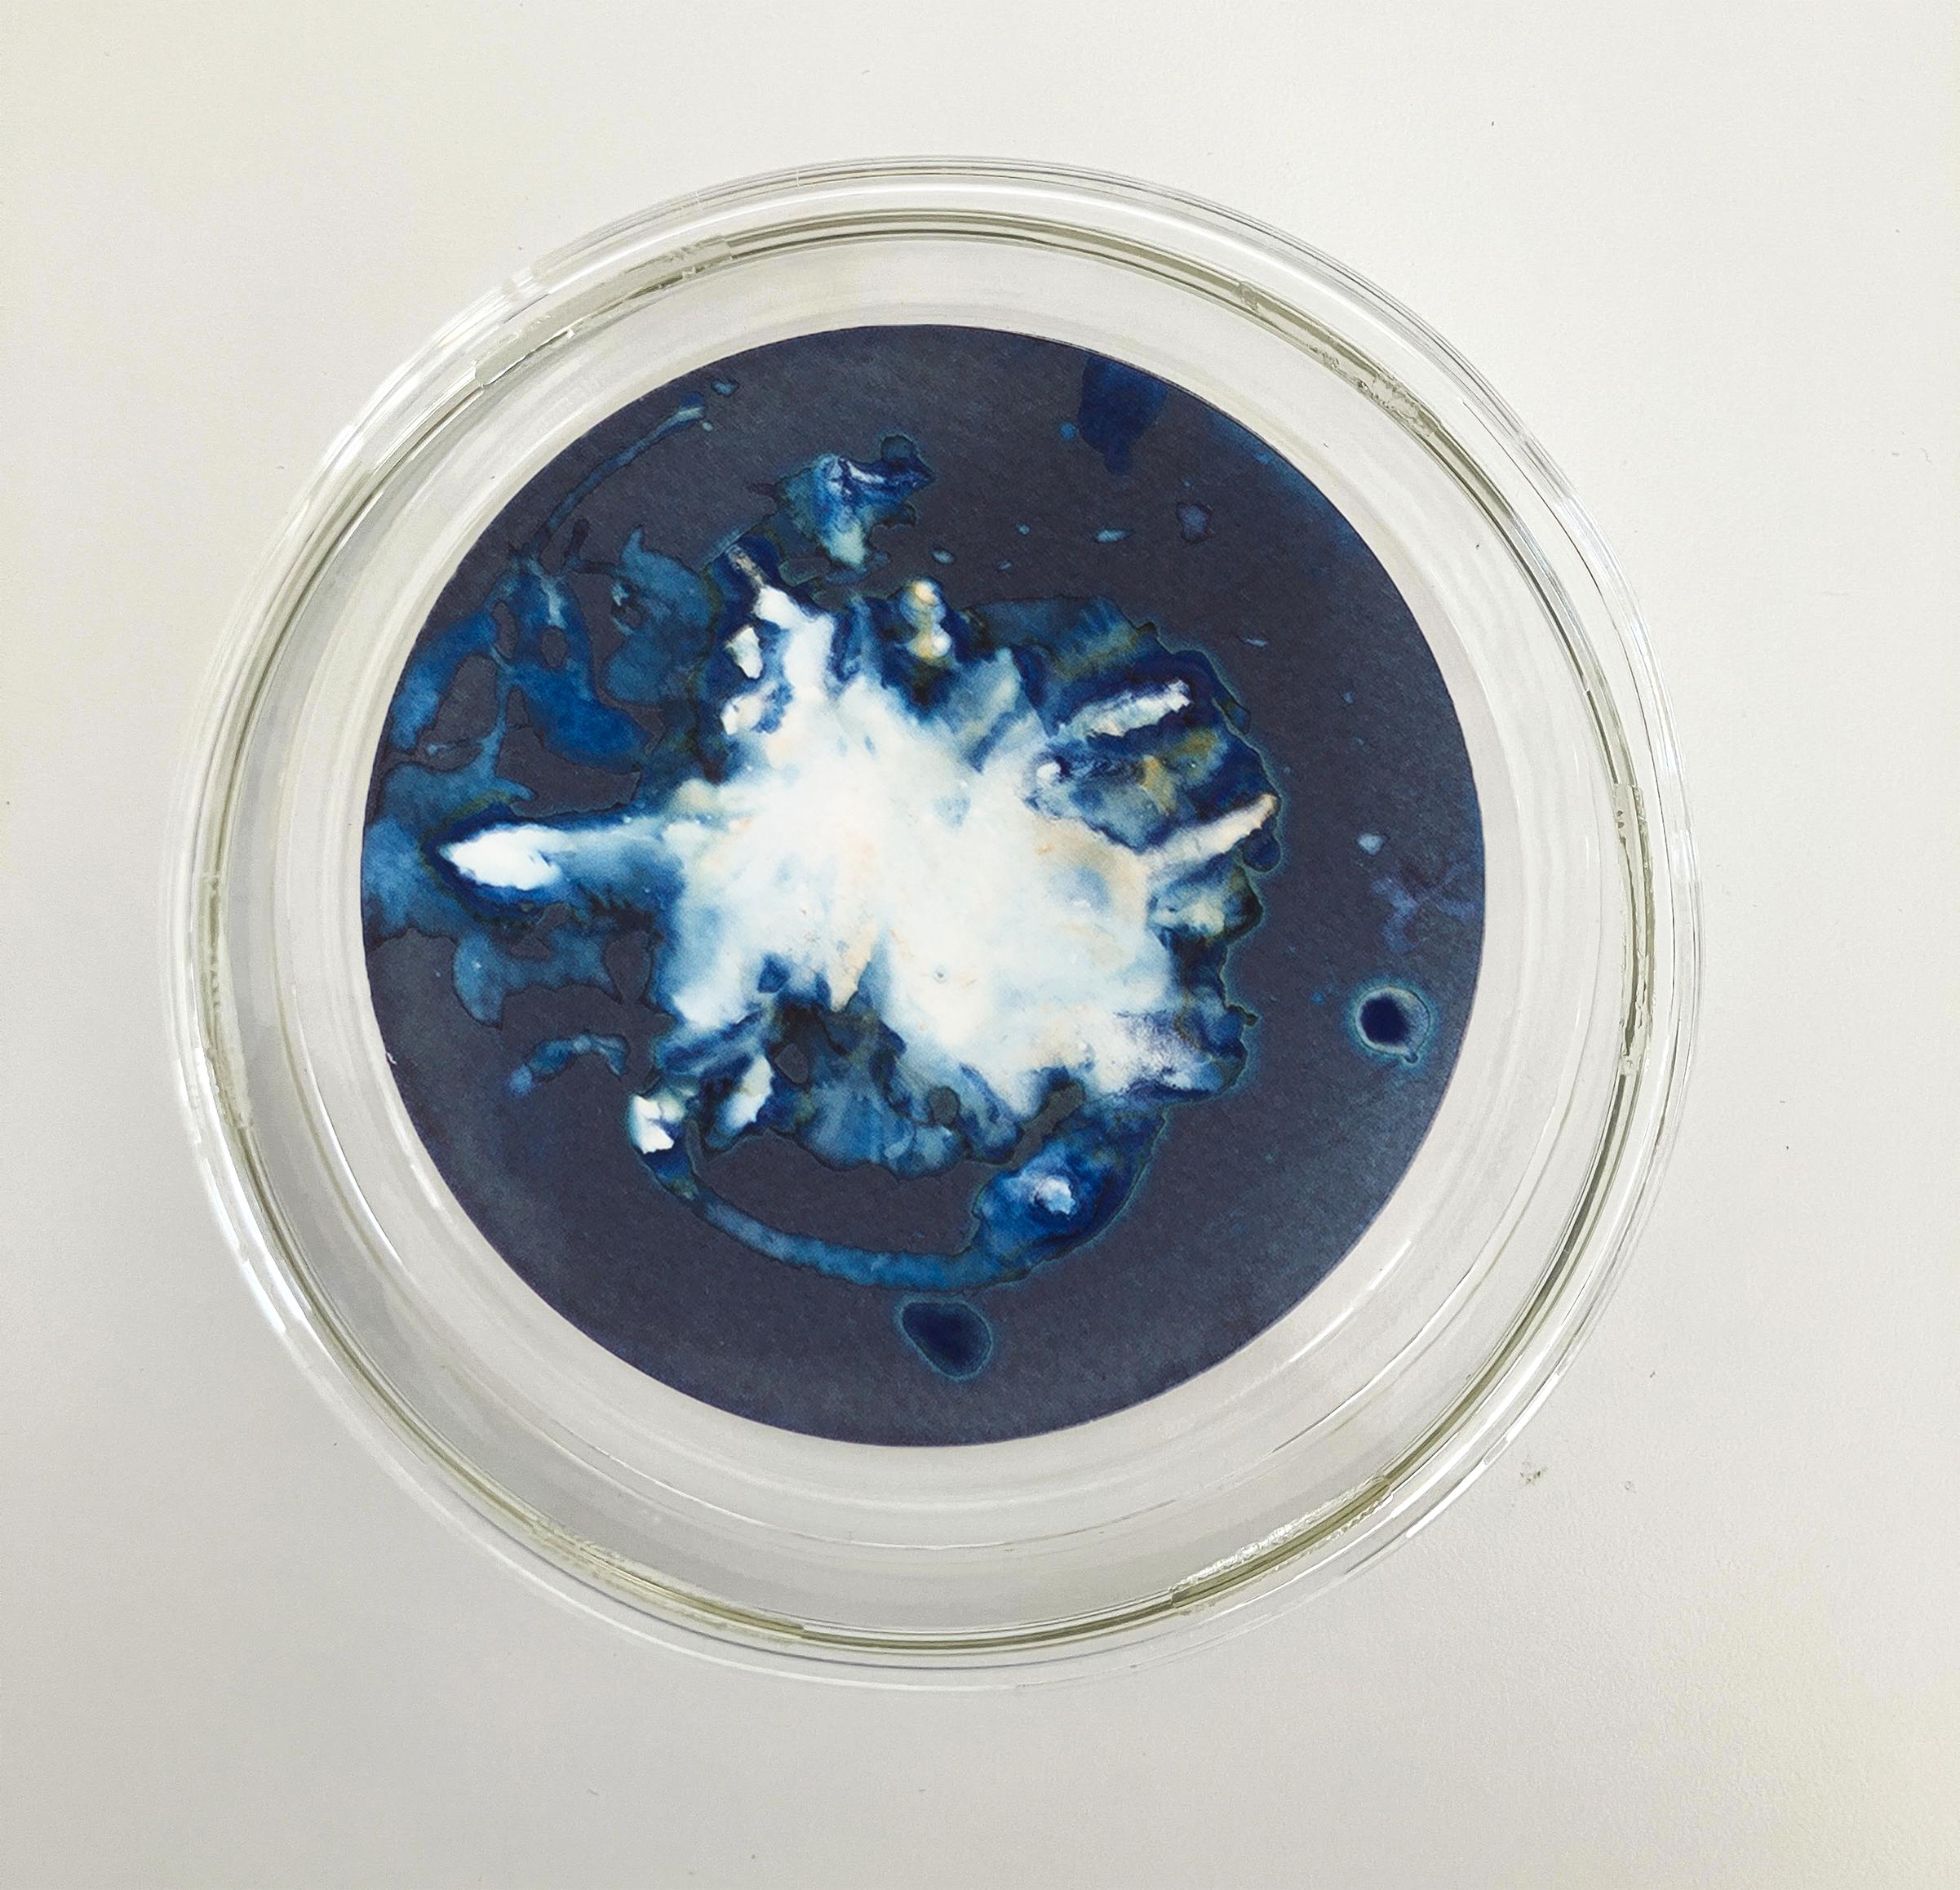 Algas 14, 41 y 68. Cyanotype photograhs mounted in high resistance glass dish For Sale 4